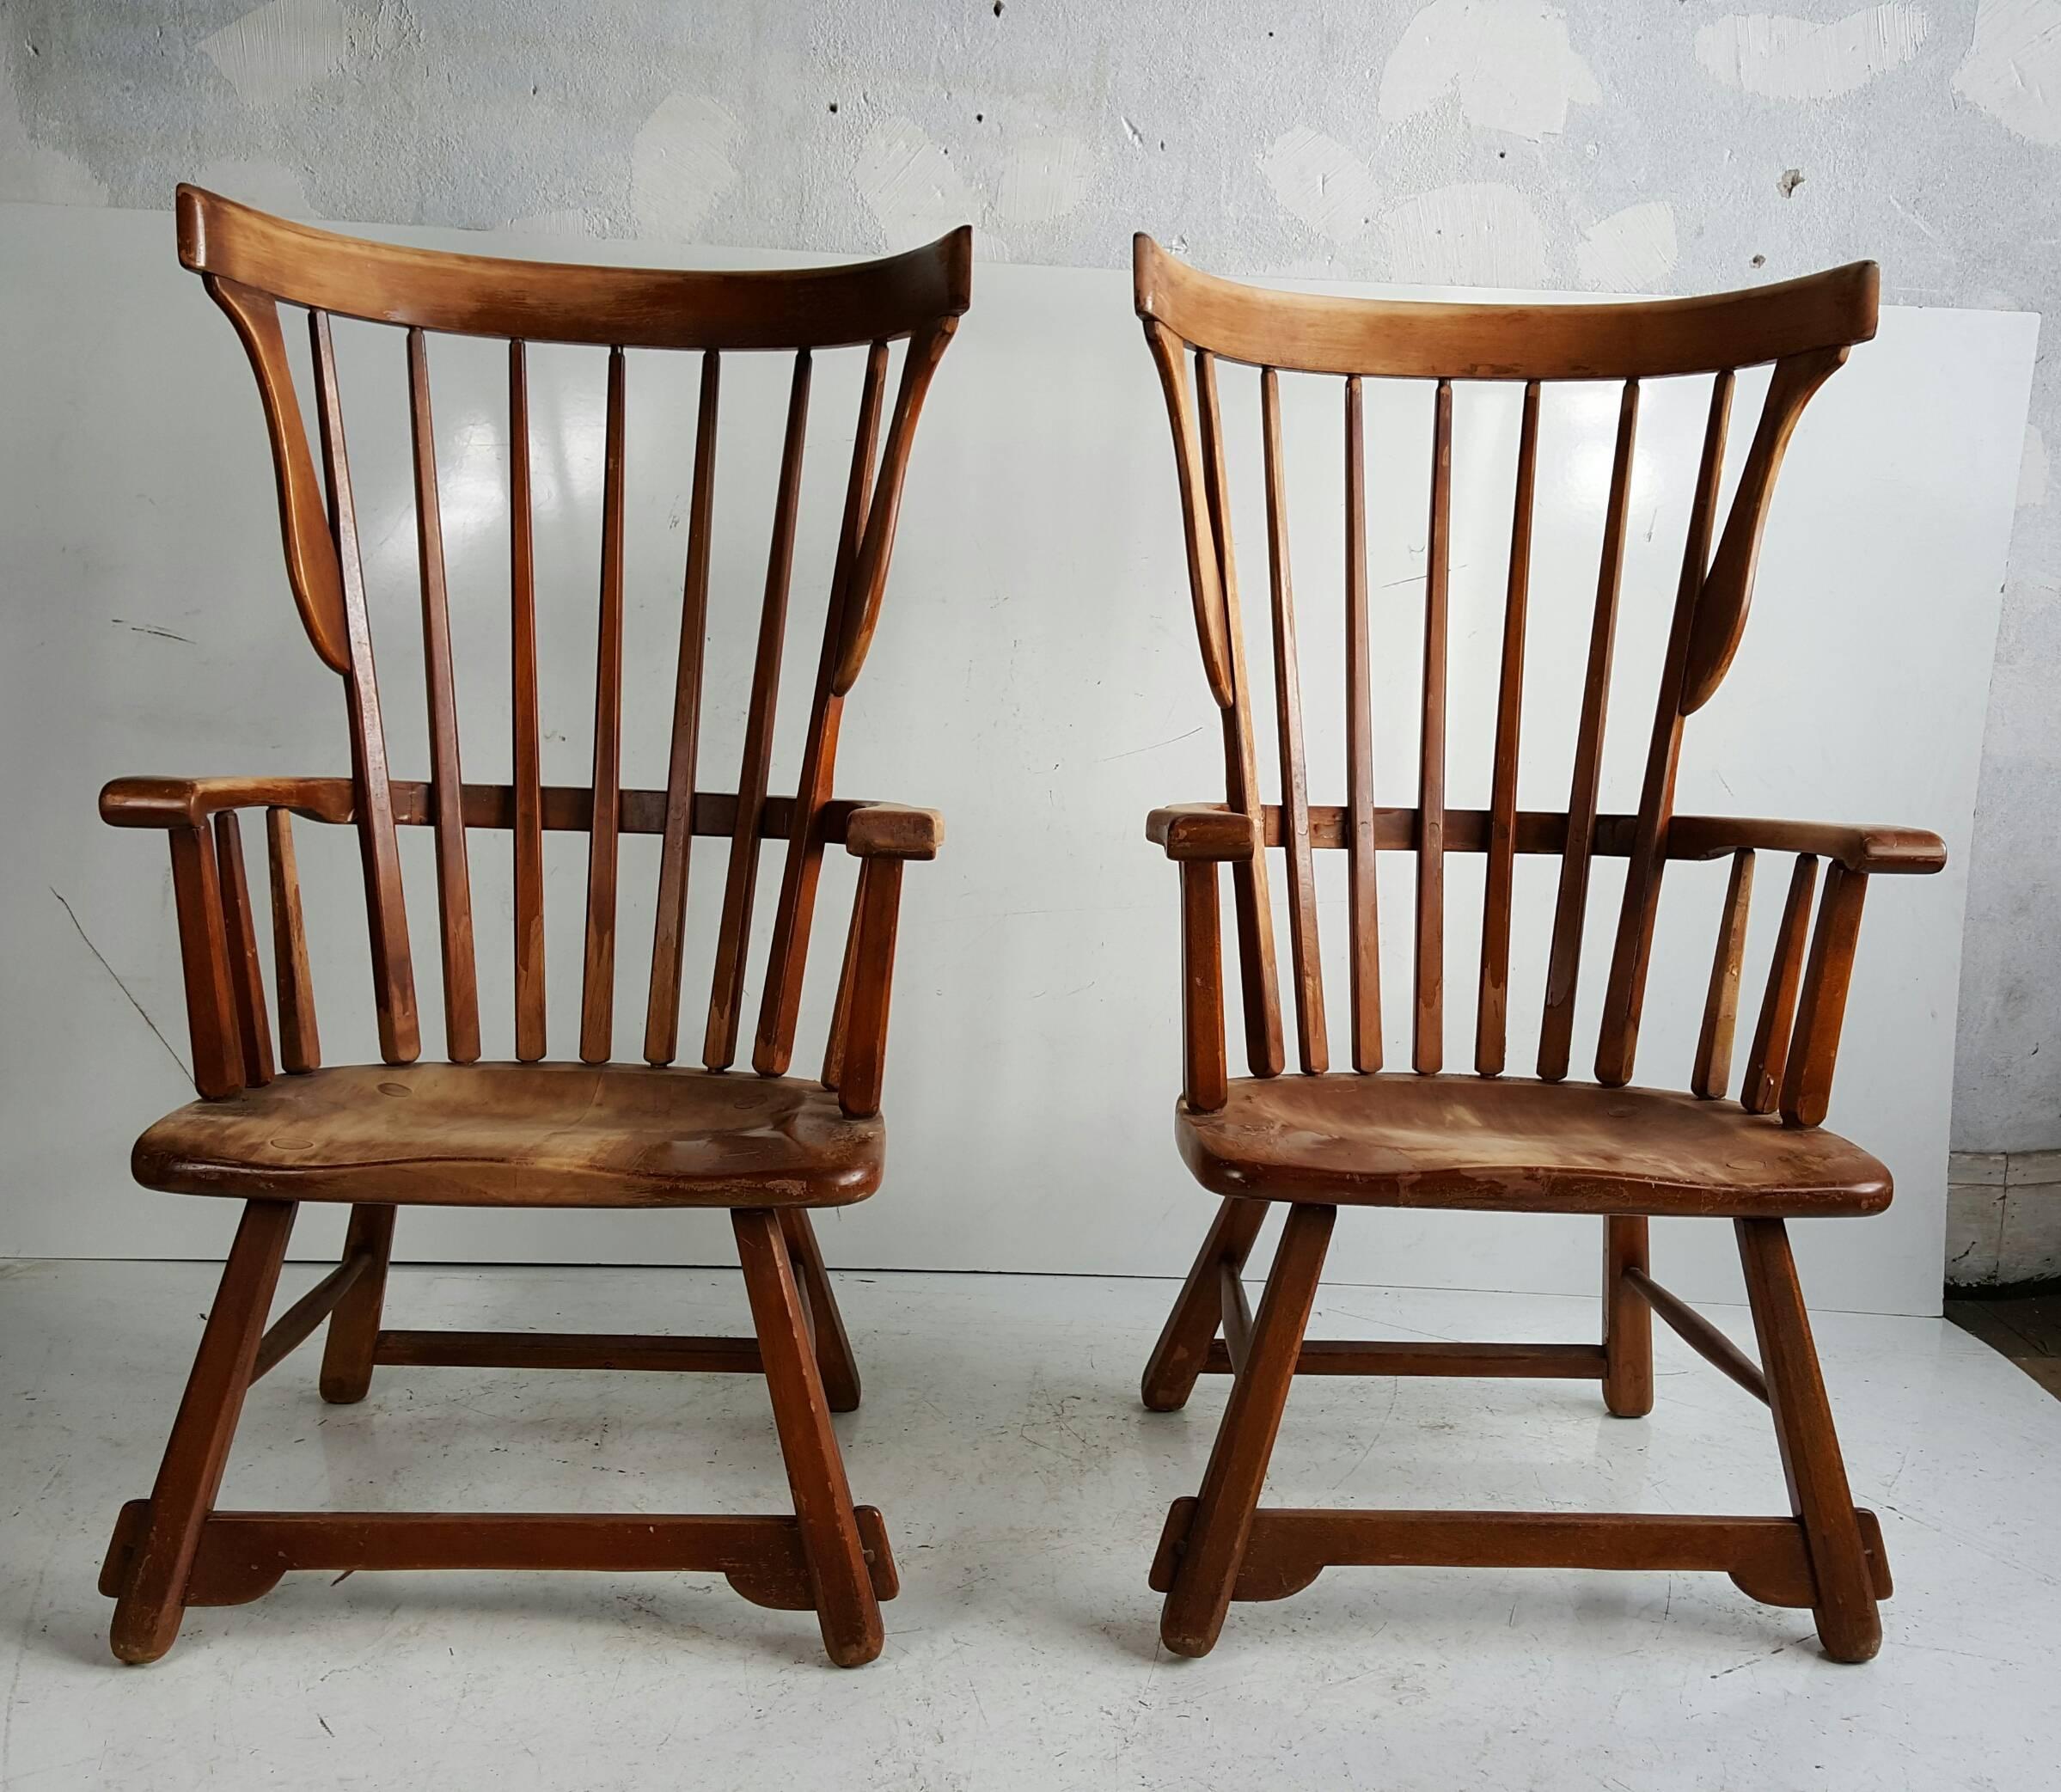 20th Century Pair of Oversized Maple Wood Windsor Fan Back Arm Chairs